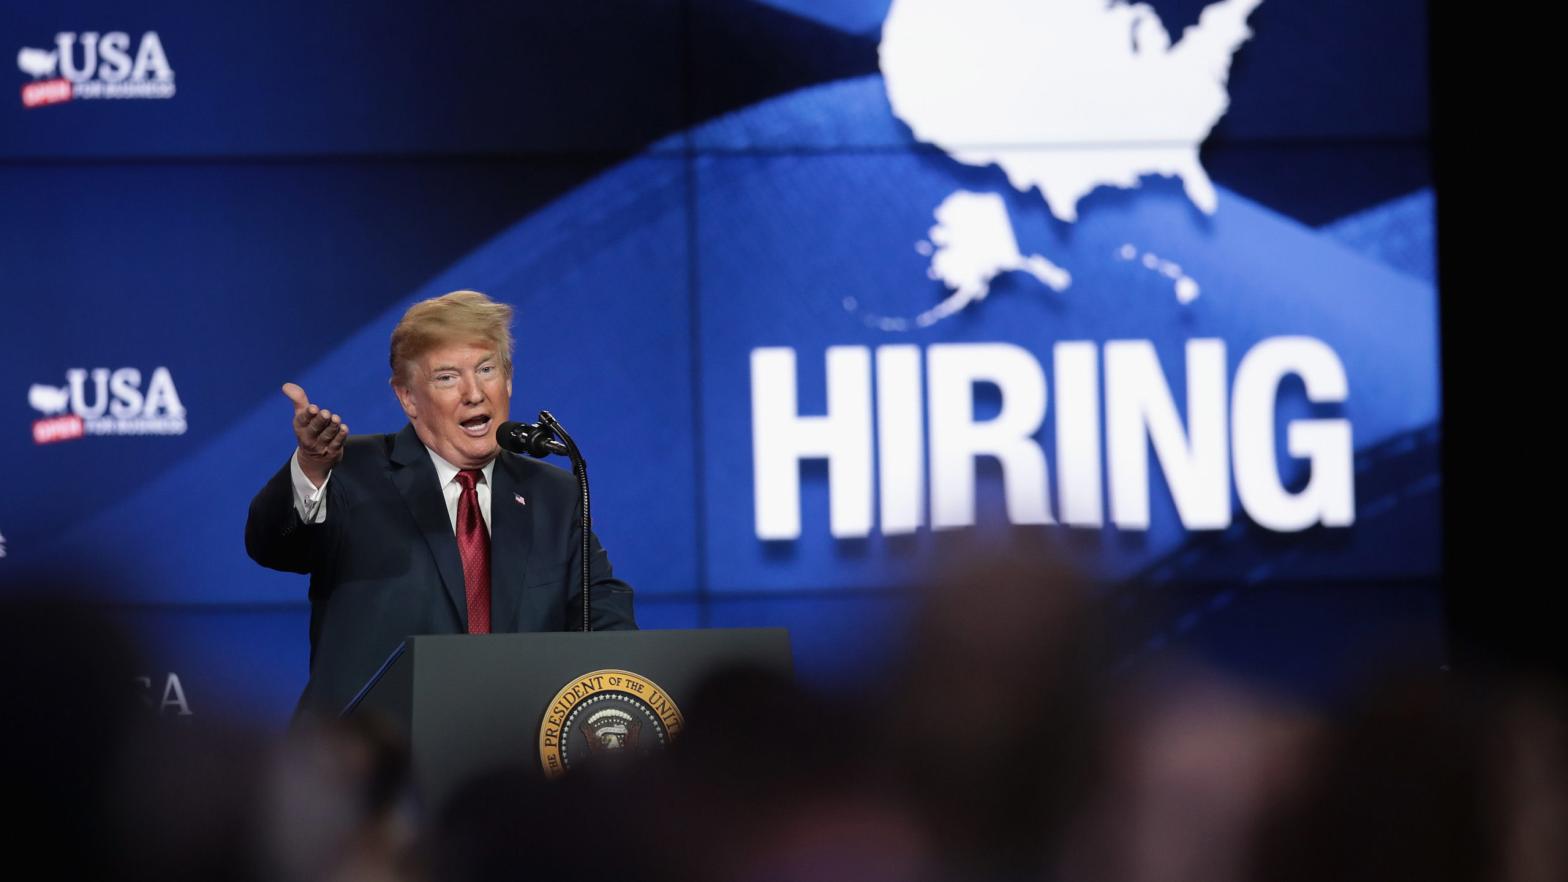 President Donald Trump speaks to guests during a groundbreaking ceremony for the $US10 ($14) billion Foxconn factory complex on June 28, 2018 in Mt. Pleasant, Wis. (Photo: Scott Olson, Getty Images)